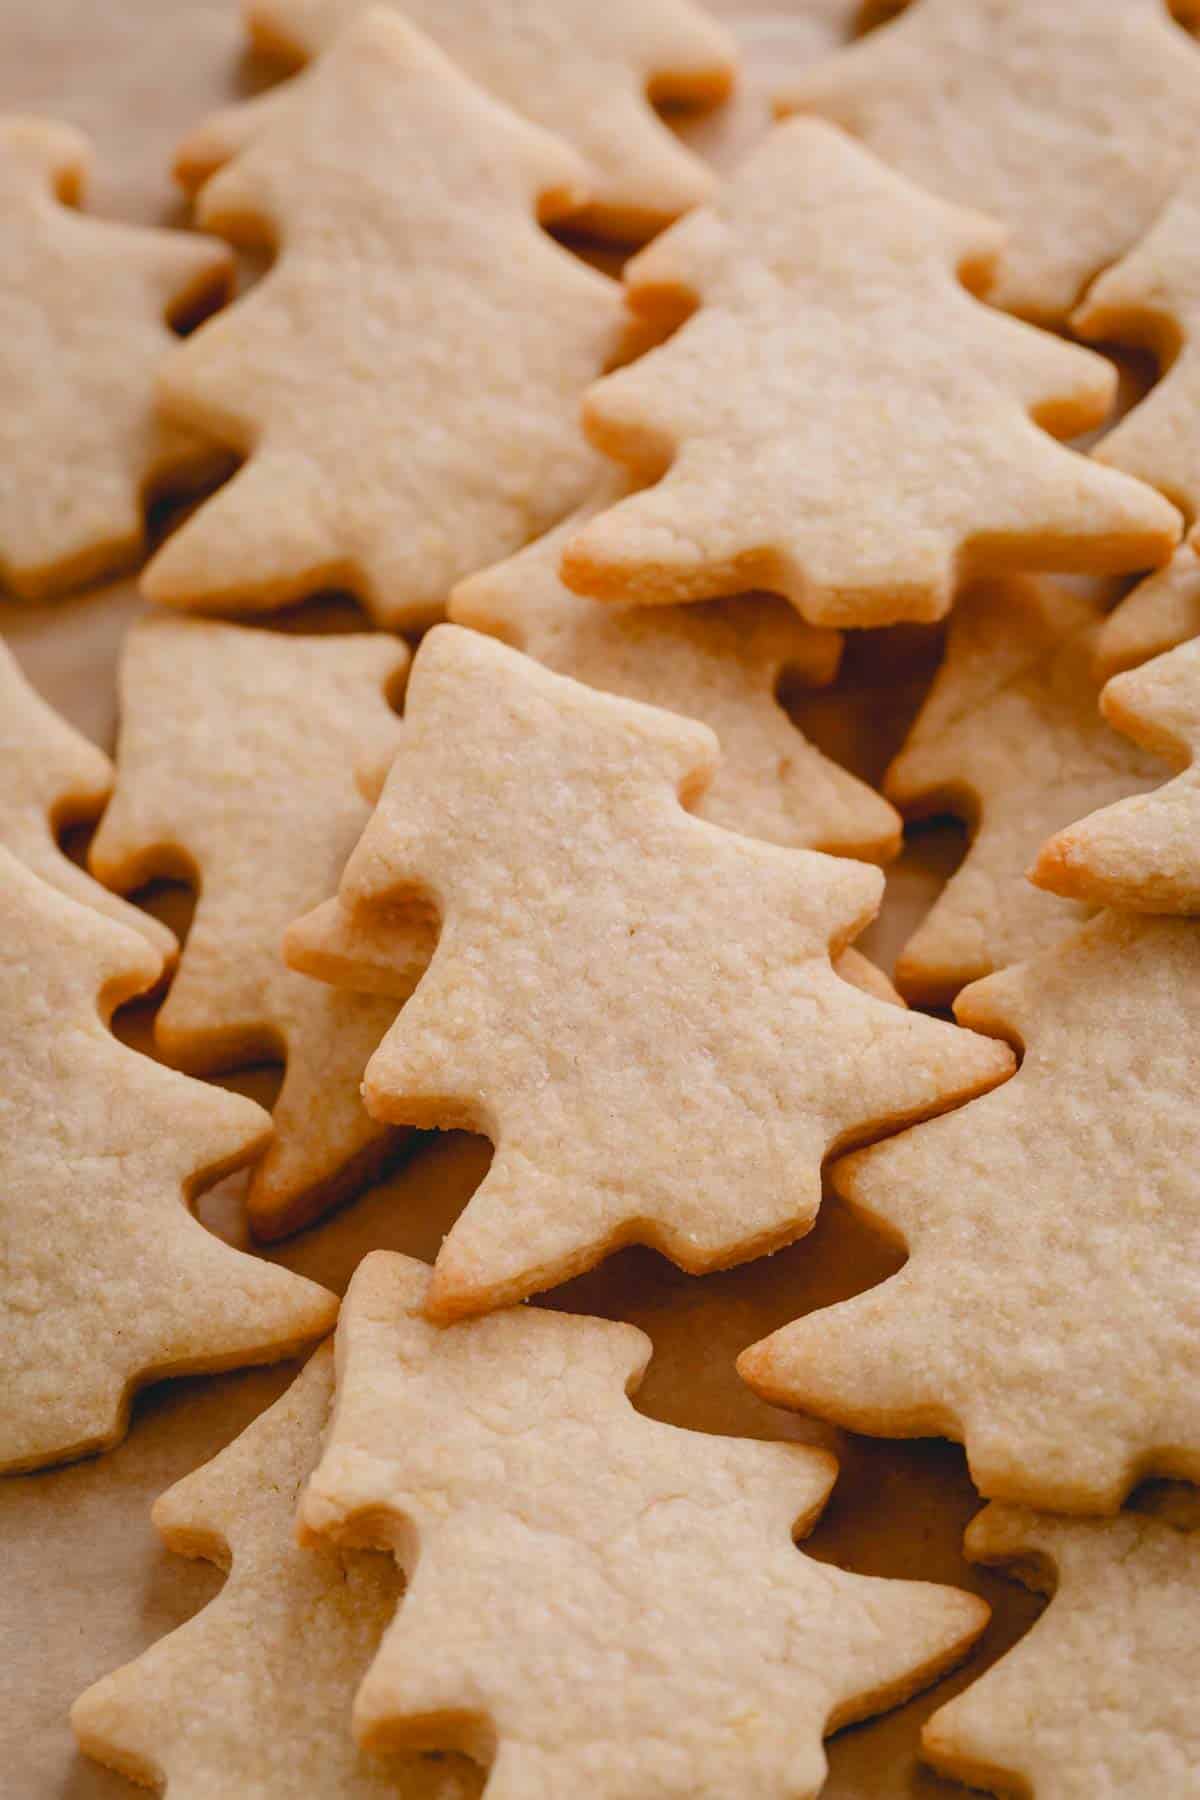 Baked Christmas sugar cookies in the shape of Christmas trees.